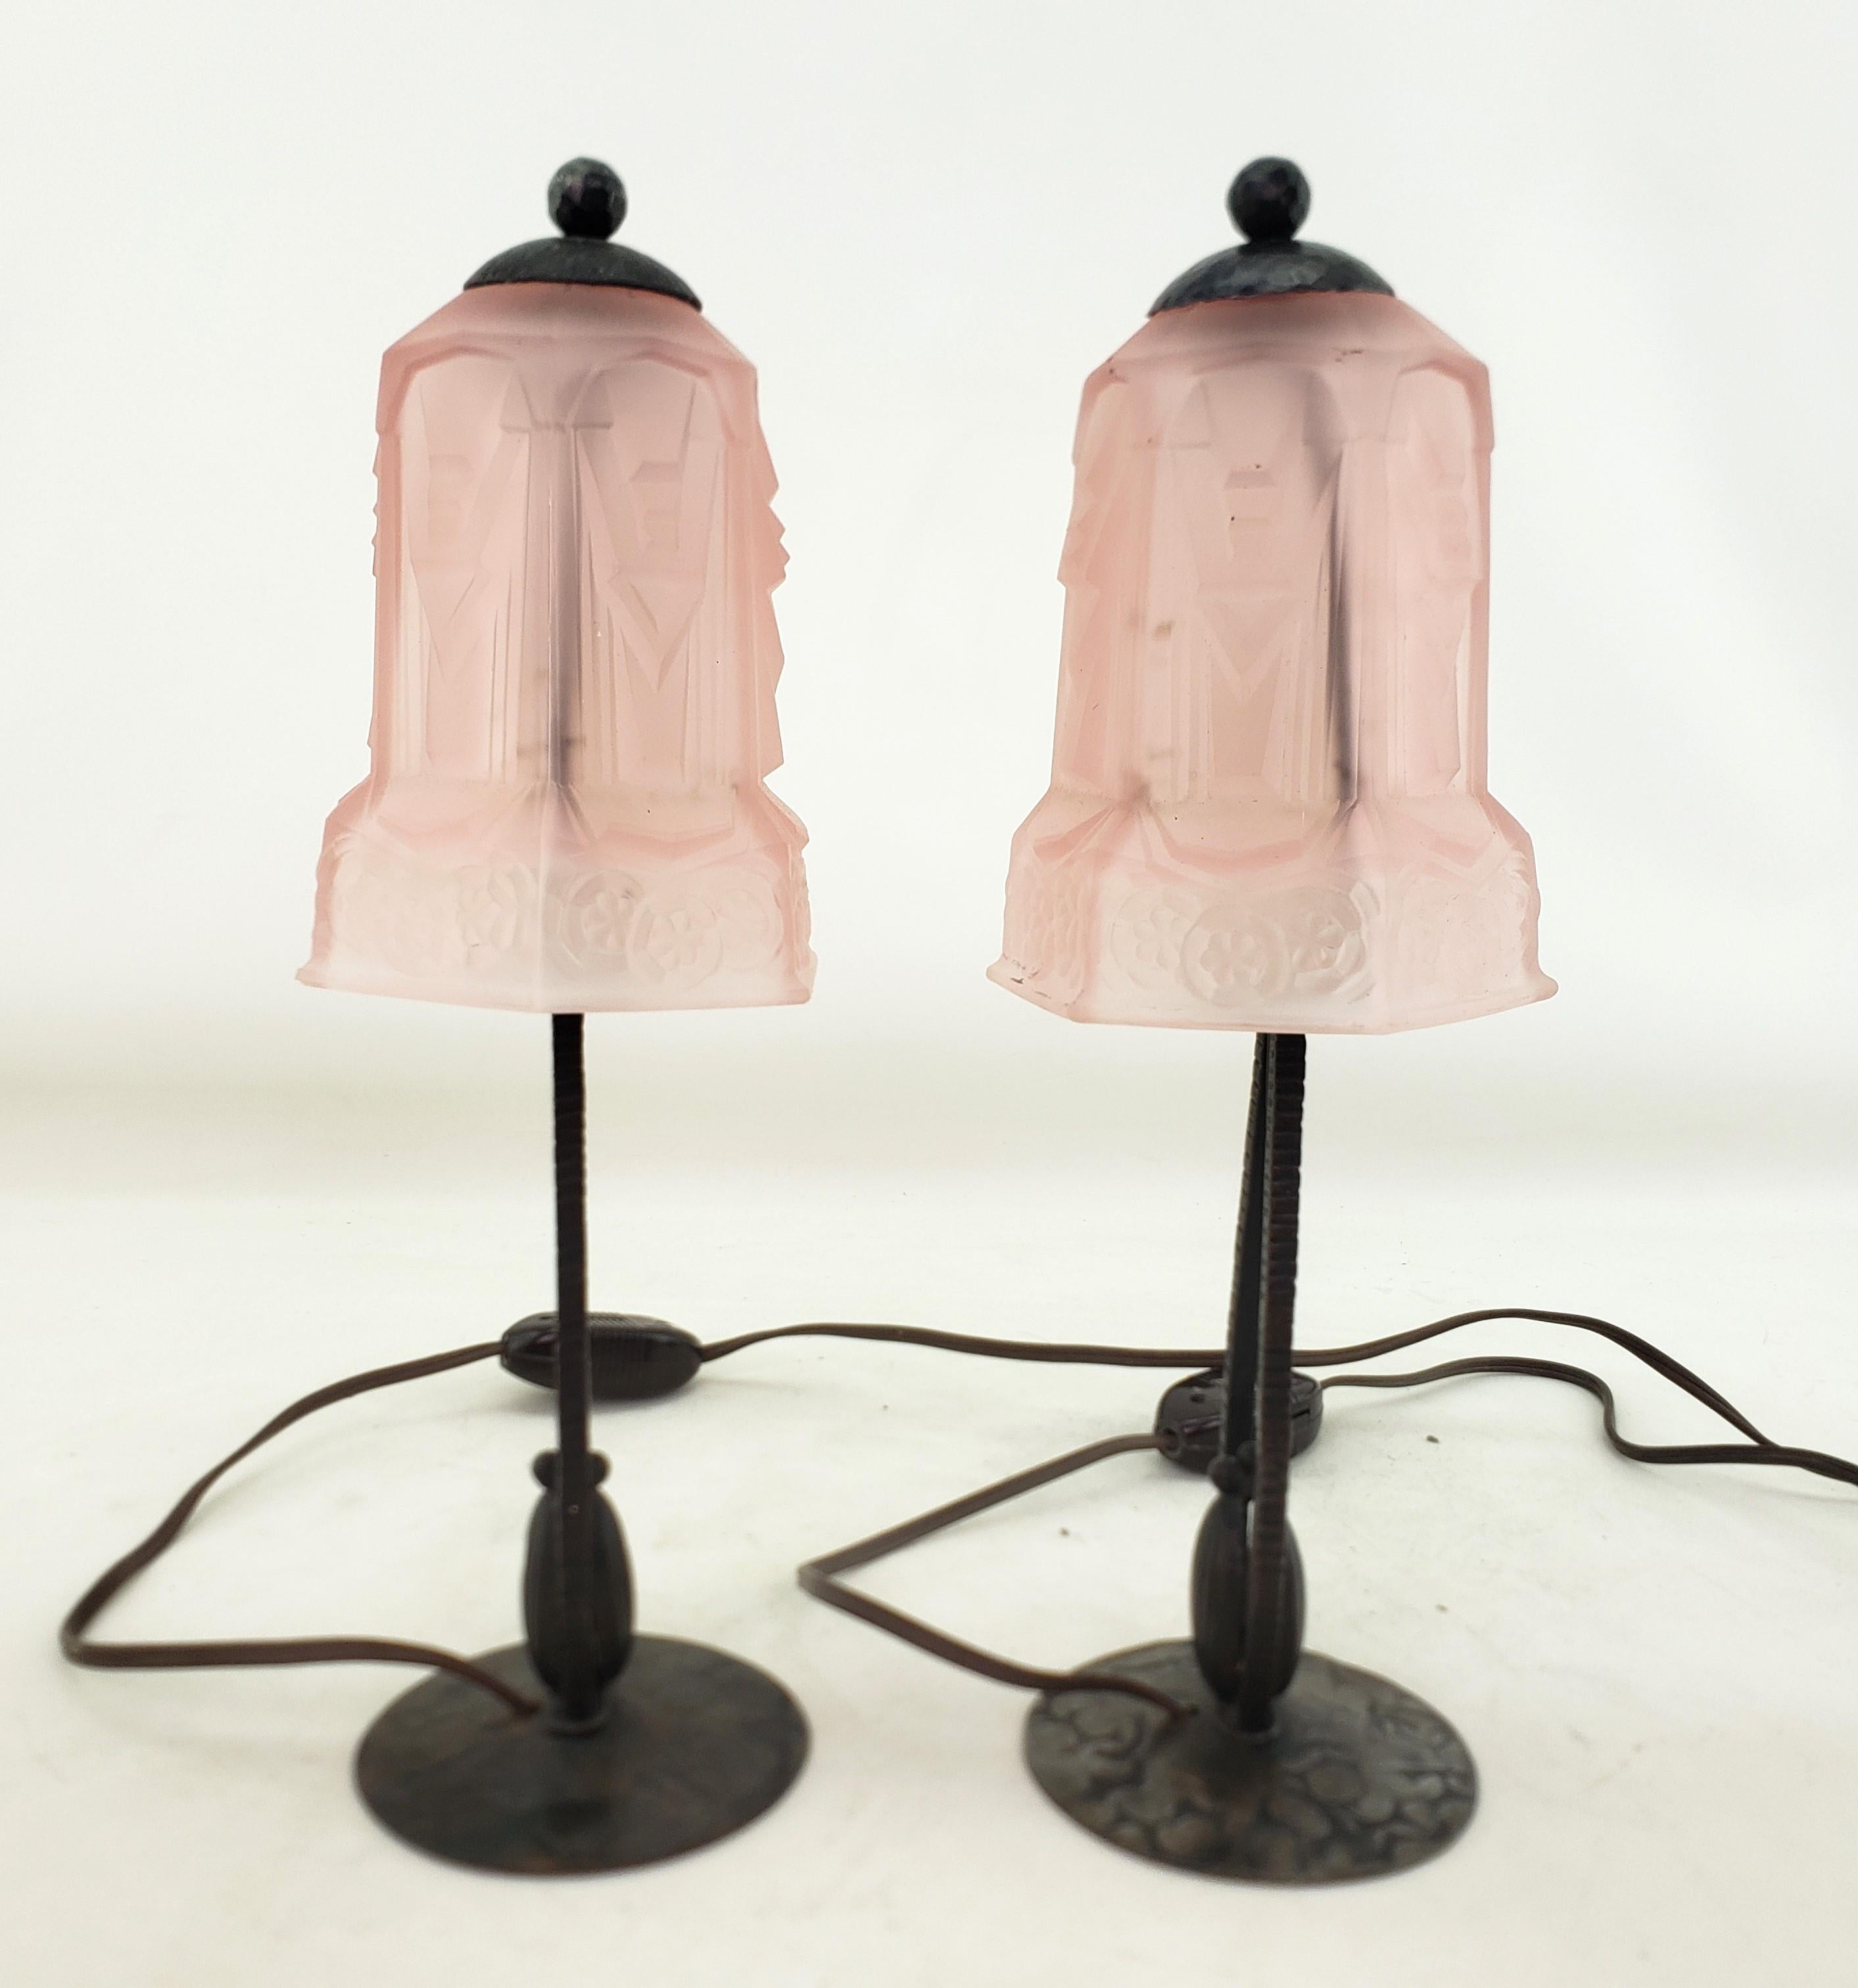 Steel Pair of Antique Art Deco Bourdoir or Table Lamps with Frosted Pink Glass Shades For Sale